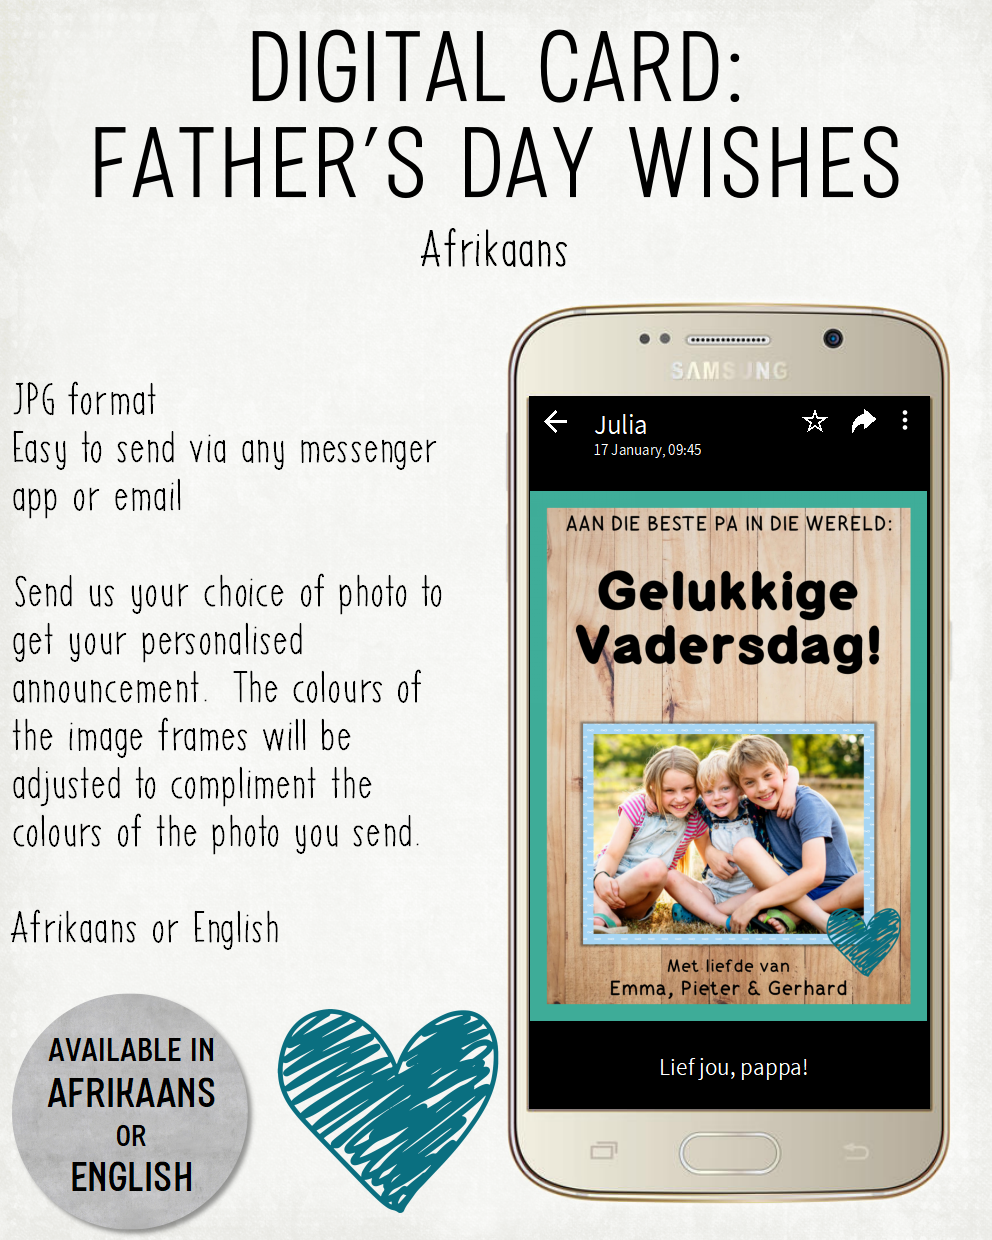 DIGITAL CARD: Father's Day Wishes (Afrikaans)